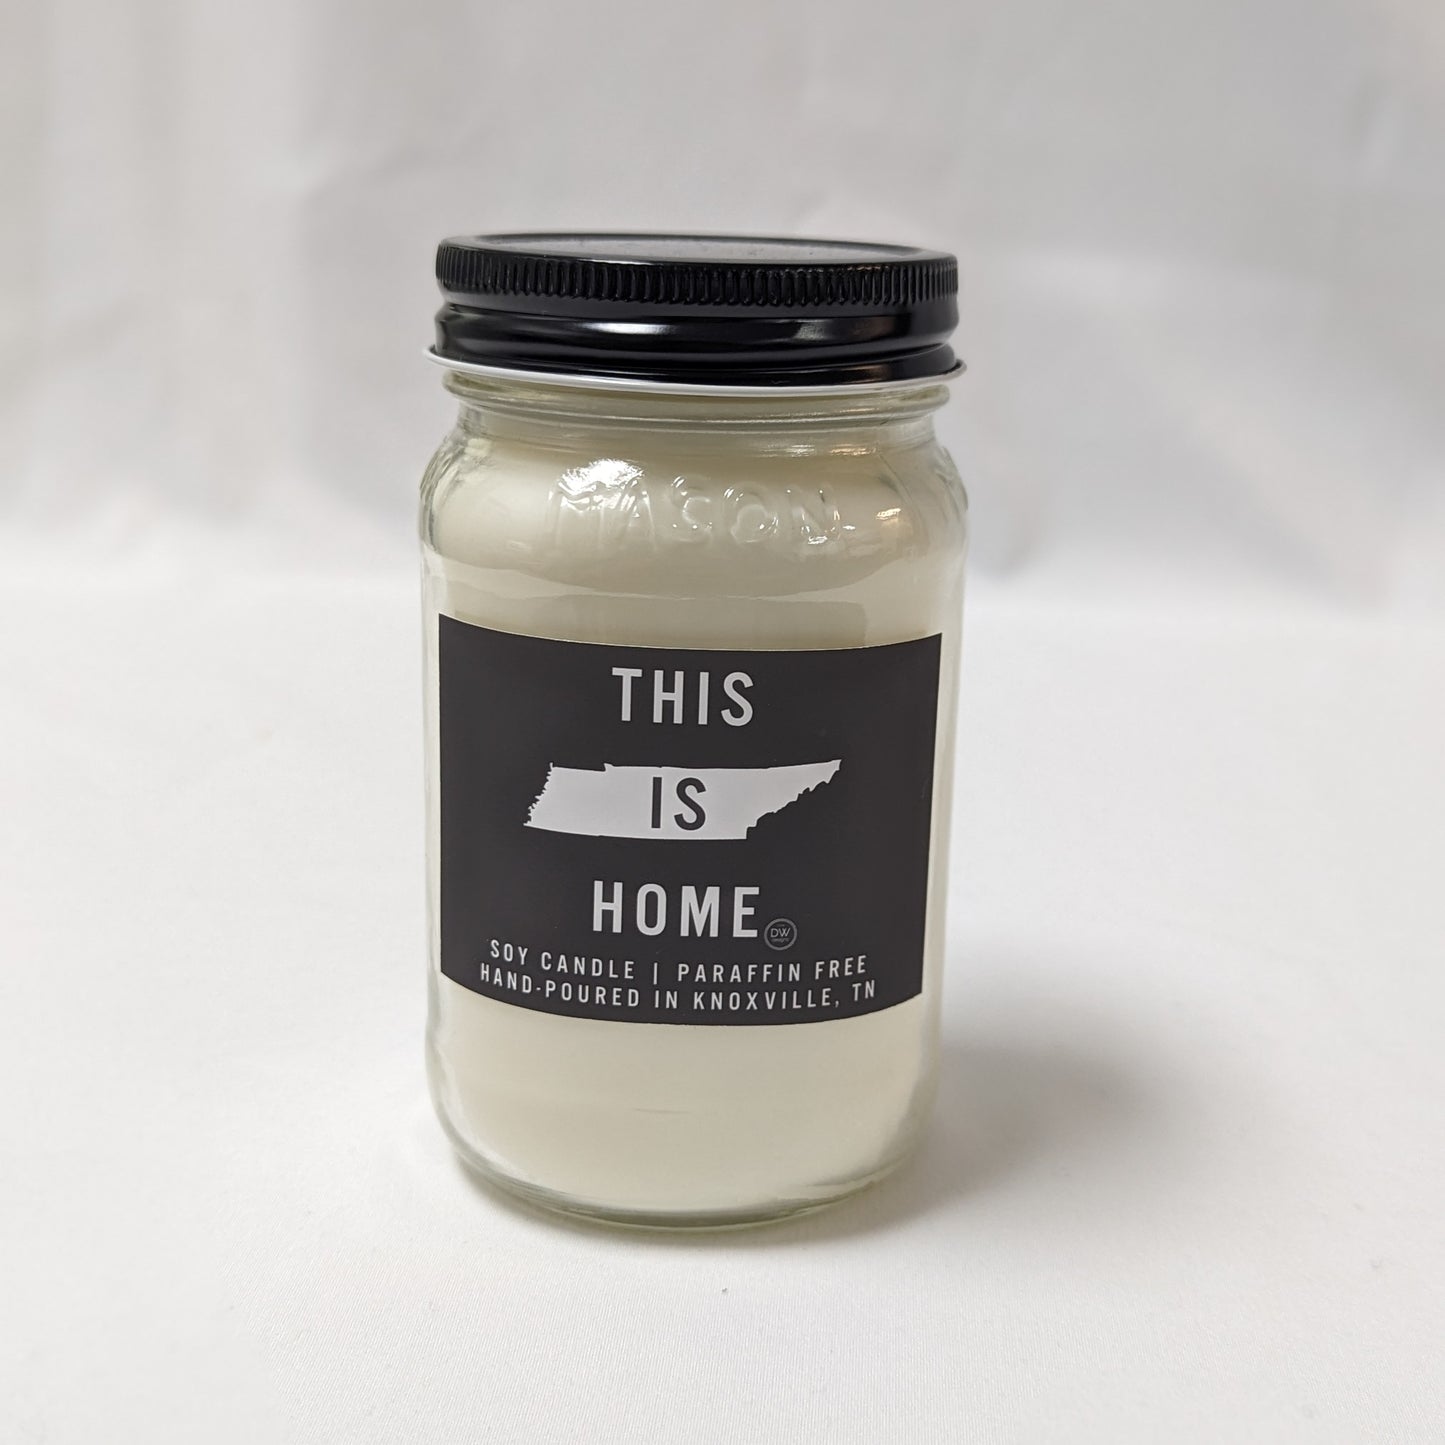 The This is Home Candle